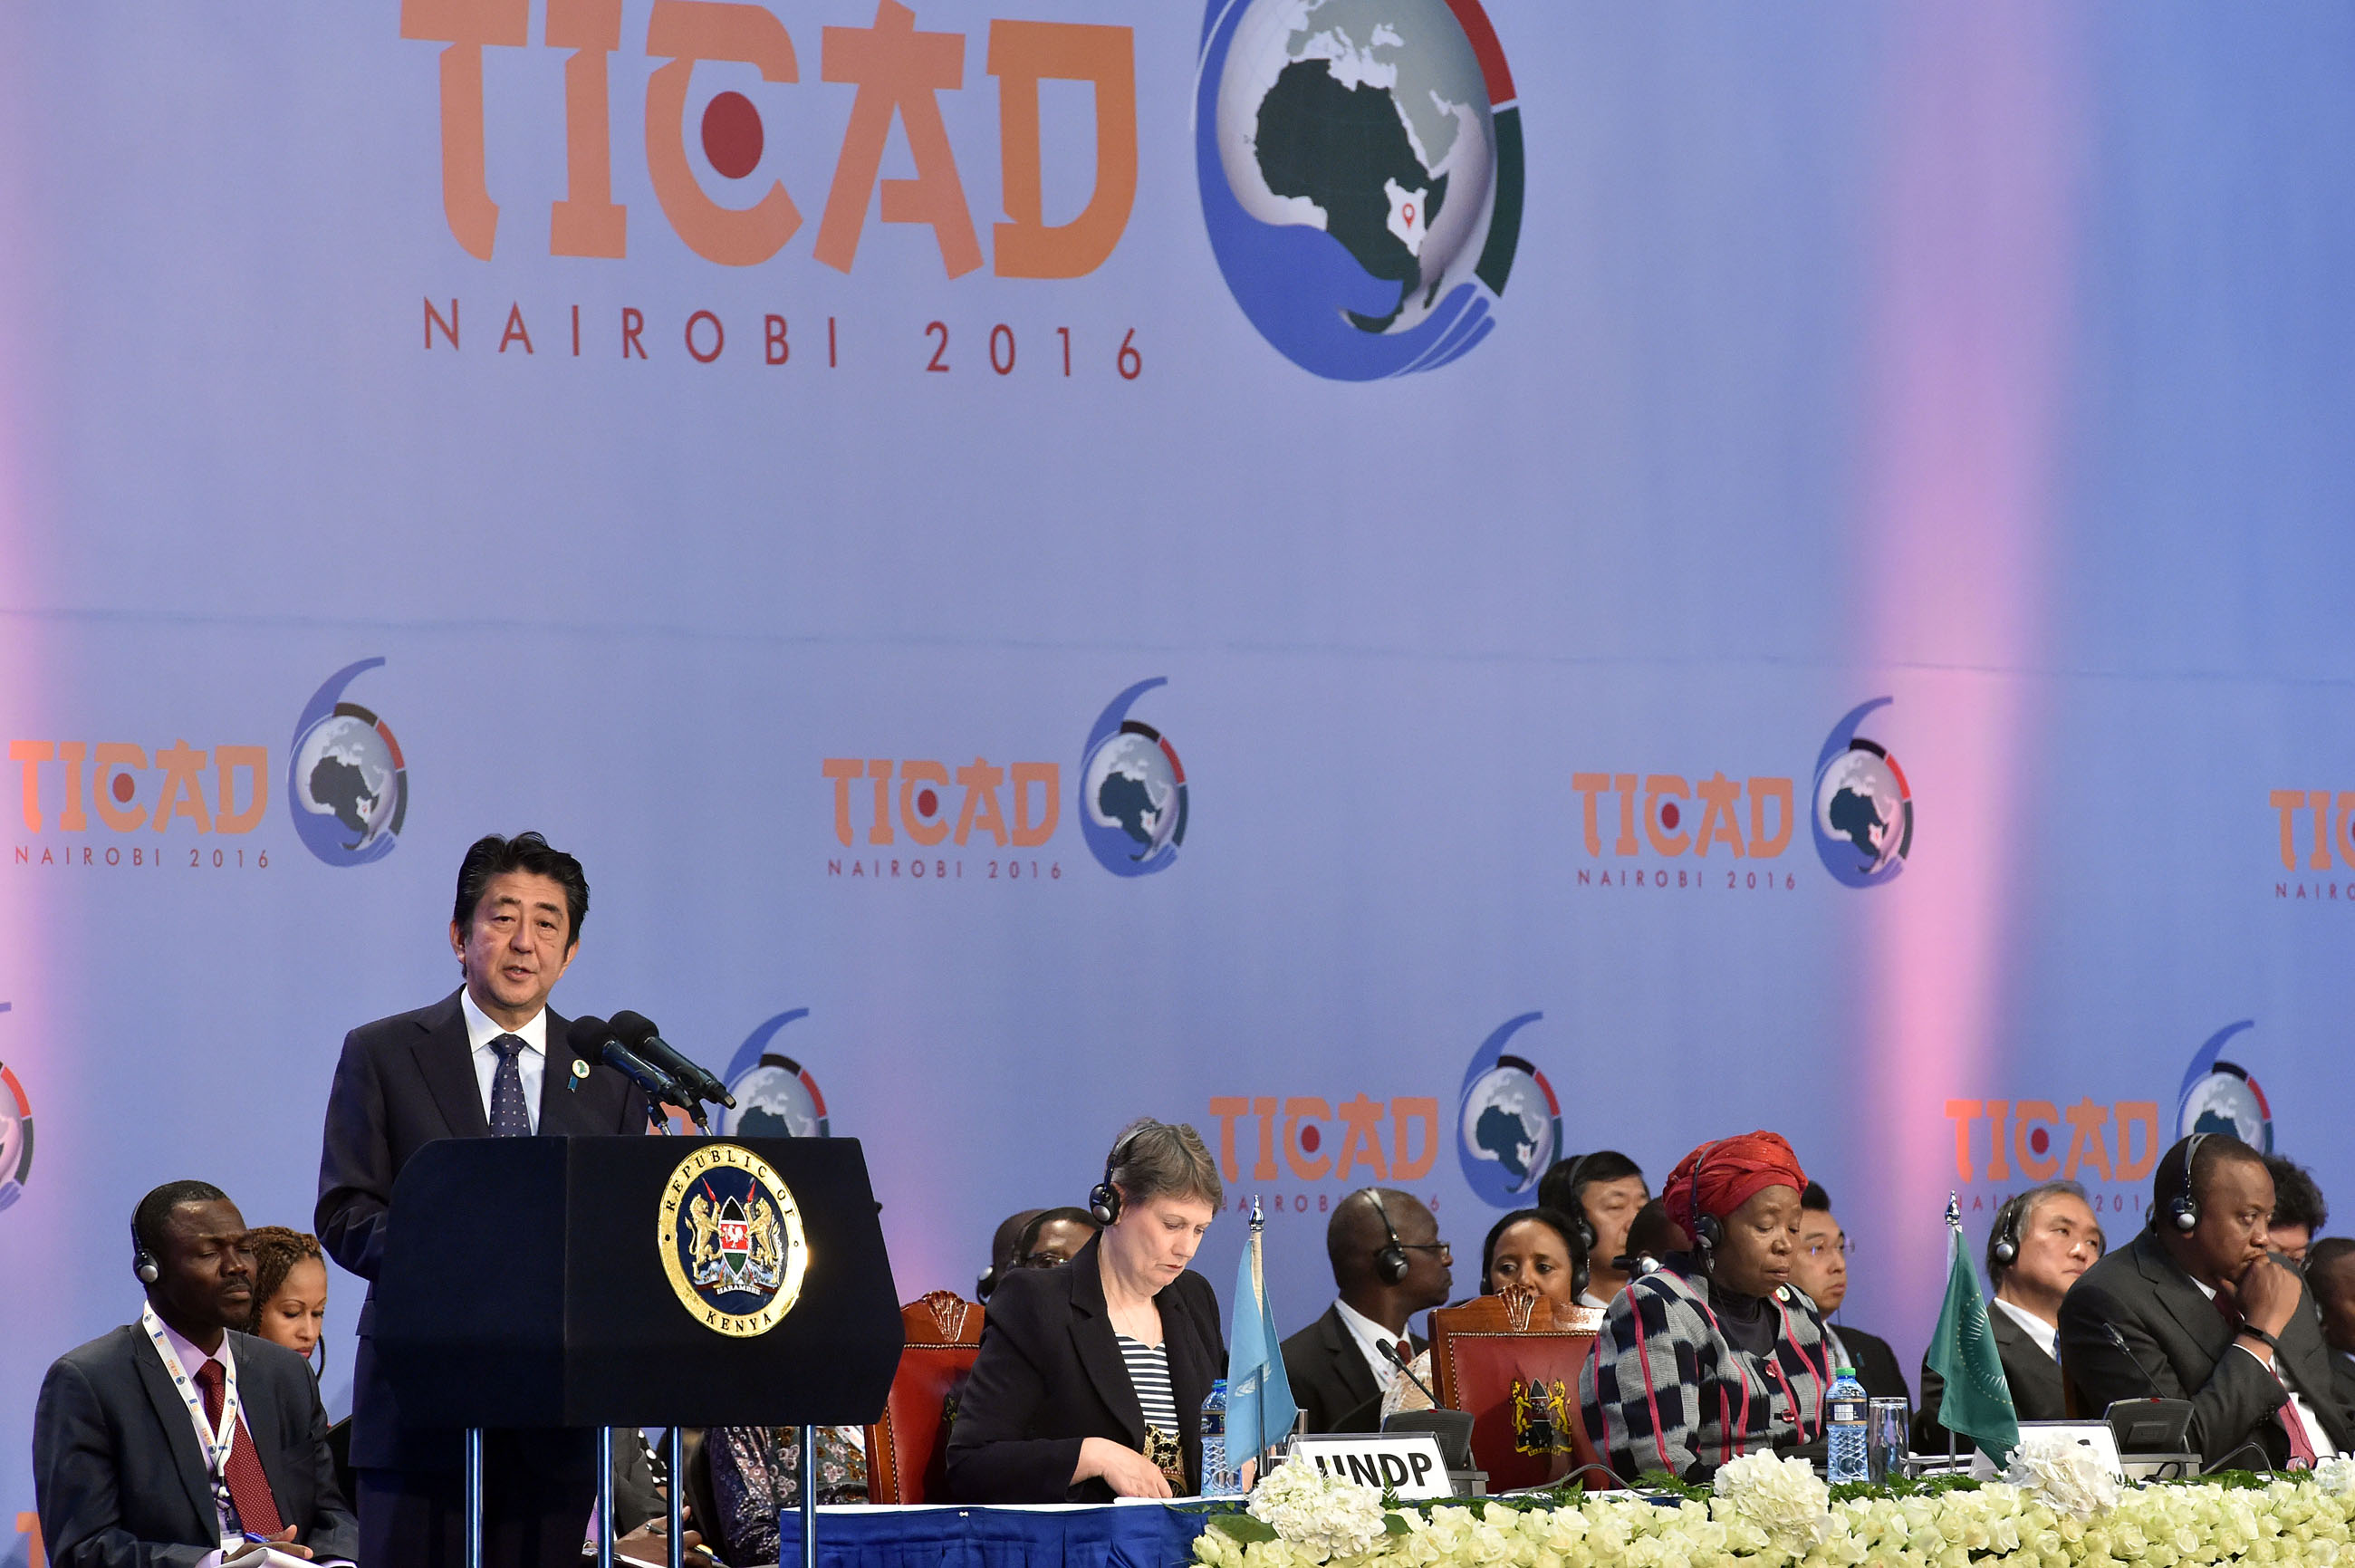 Japan pledges to invest $30billion over the next three years to boost the African economy